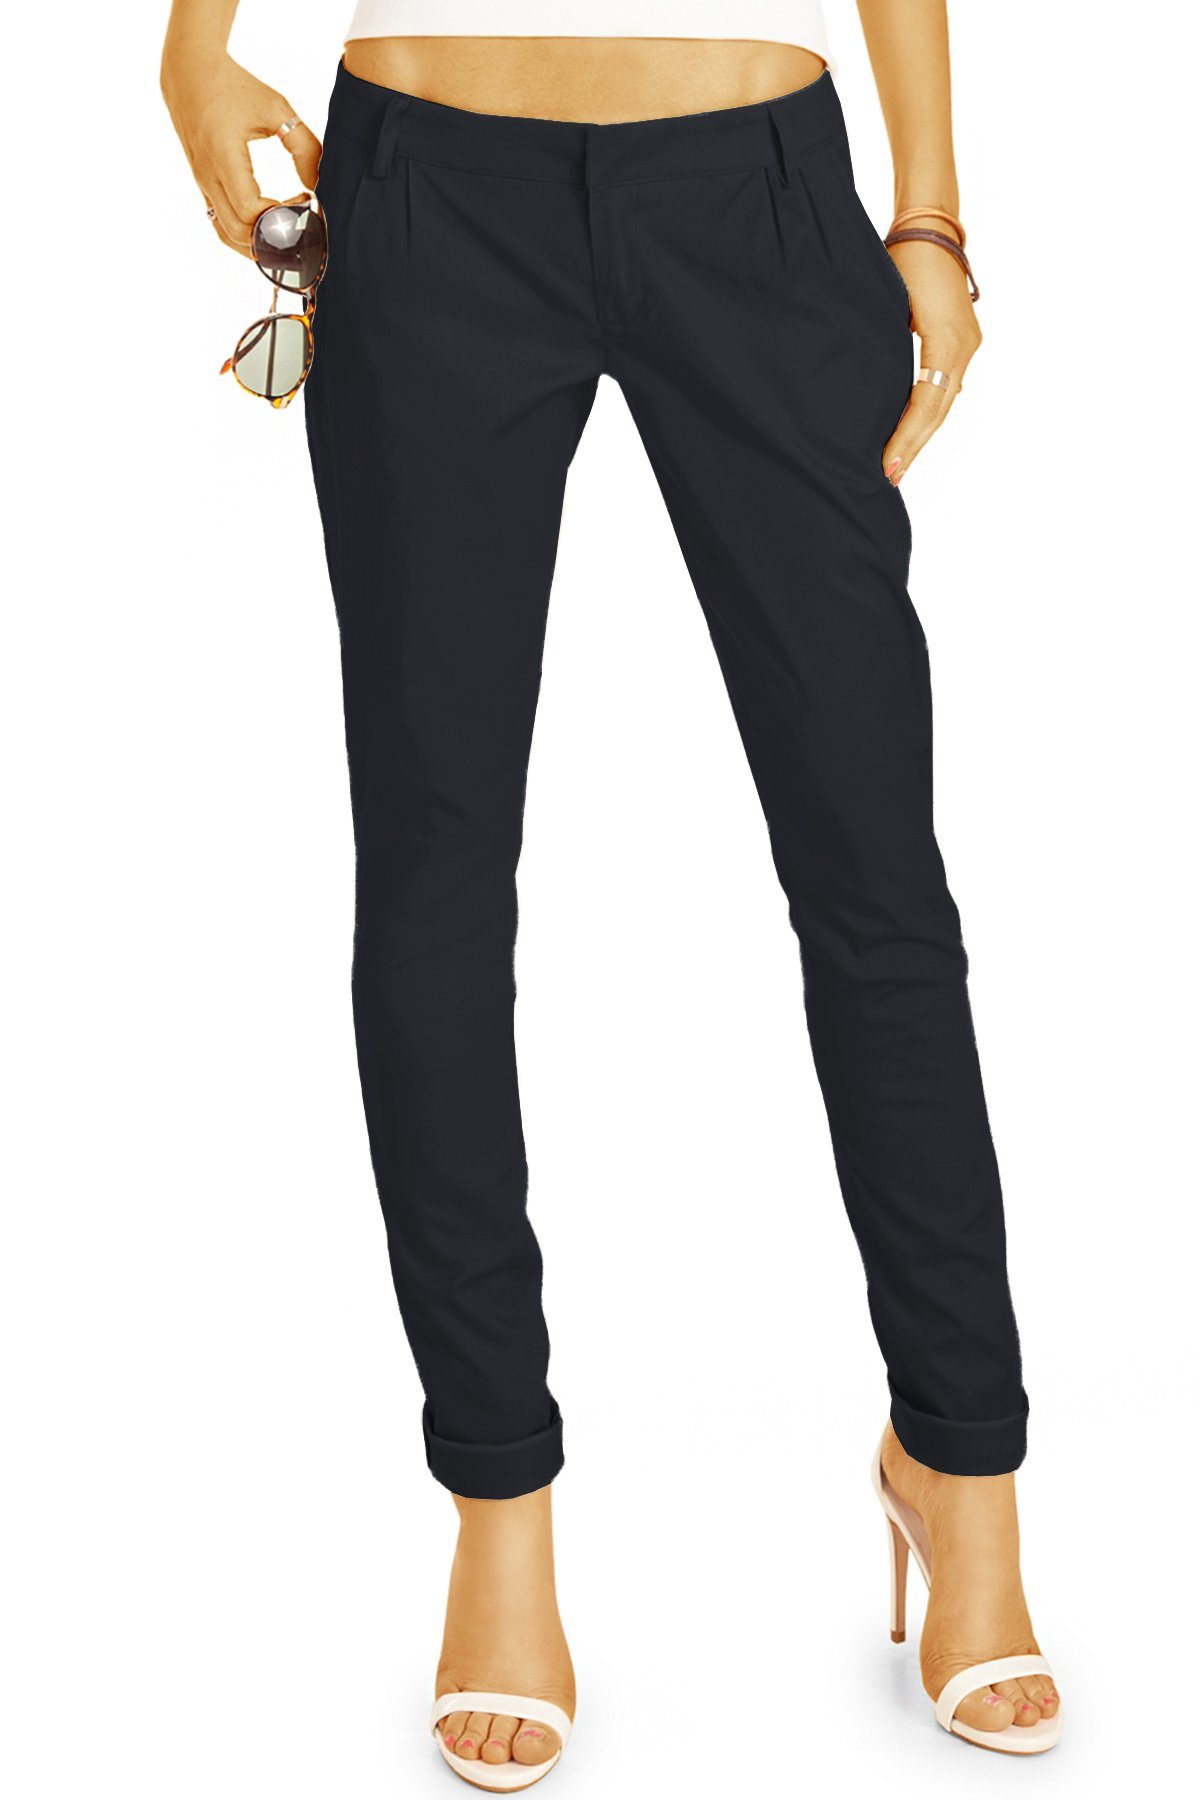 be styled Chinohose STYLED - Damen - - BE mit Stoffhose, Chinos h20a schwarz Stretch Hüfthose Tapered